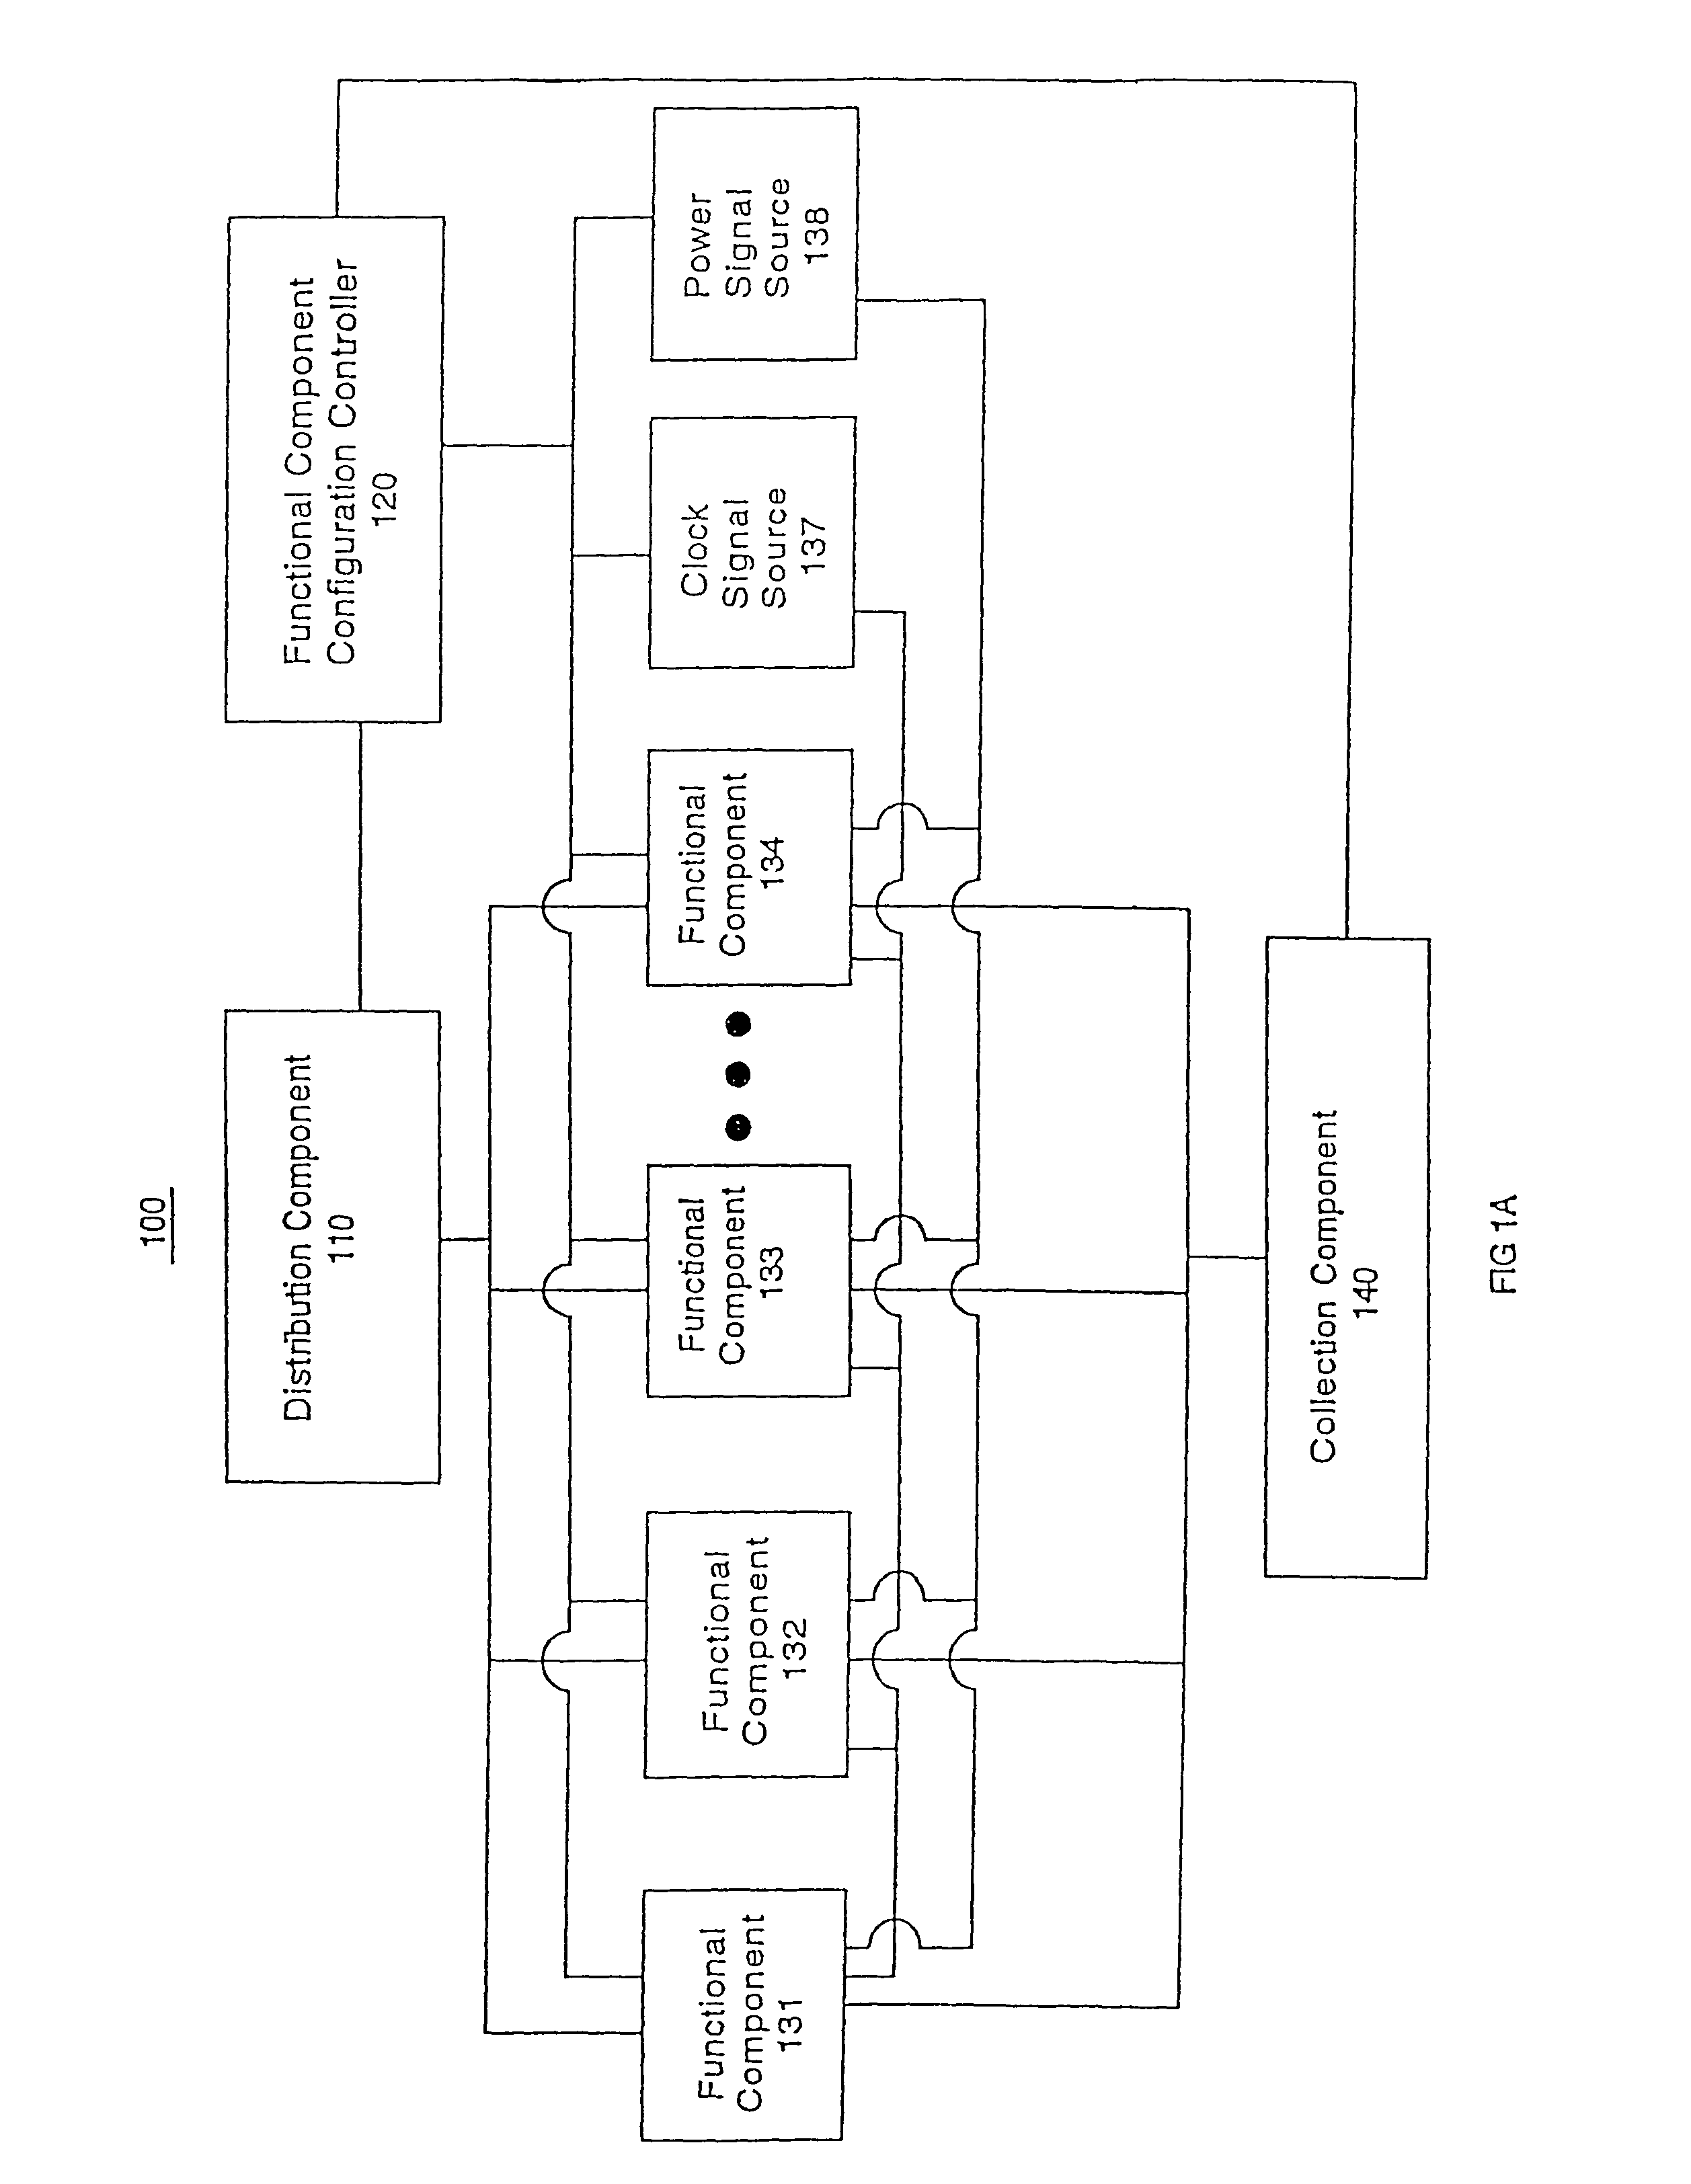 Functional component compensation reconfiguration system and method